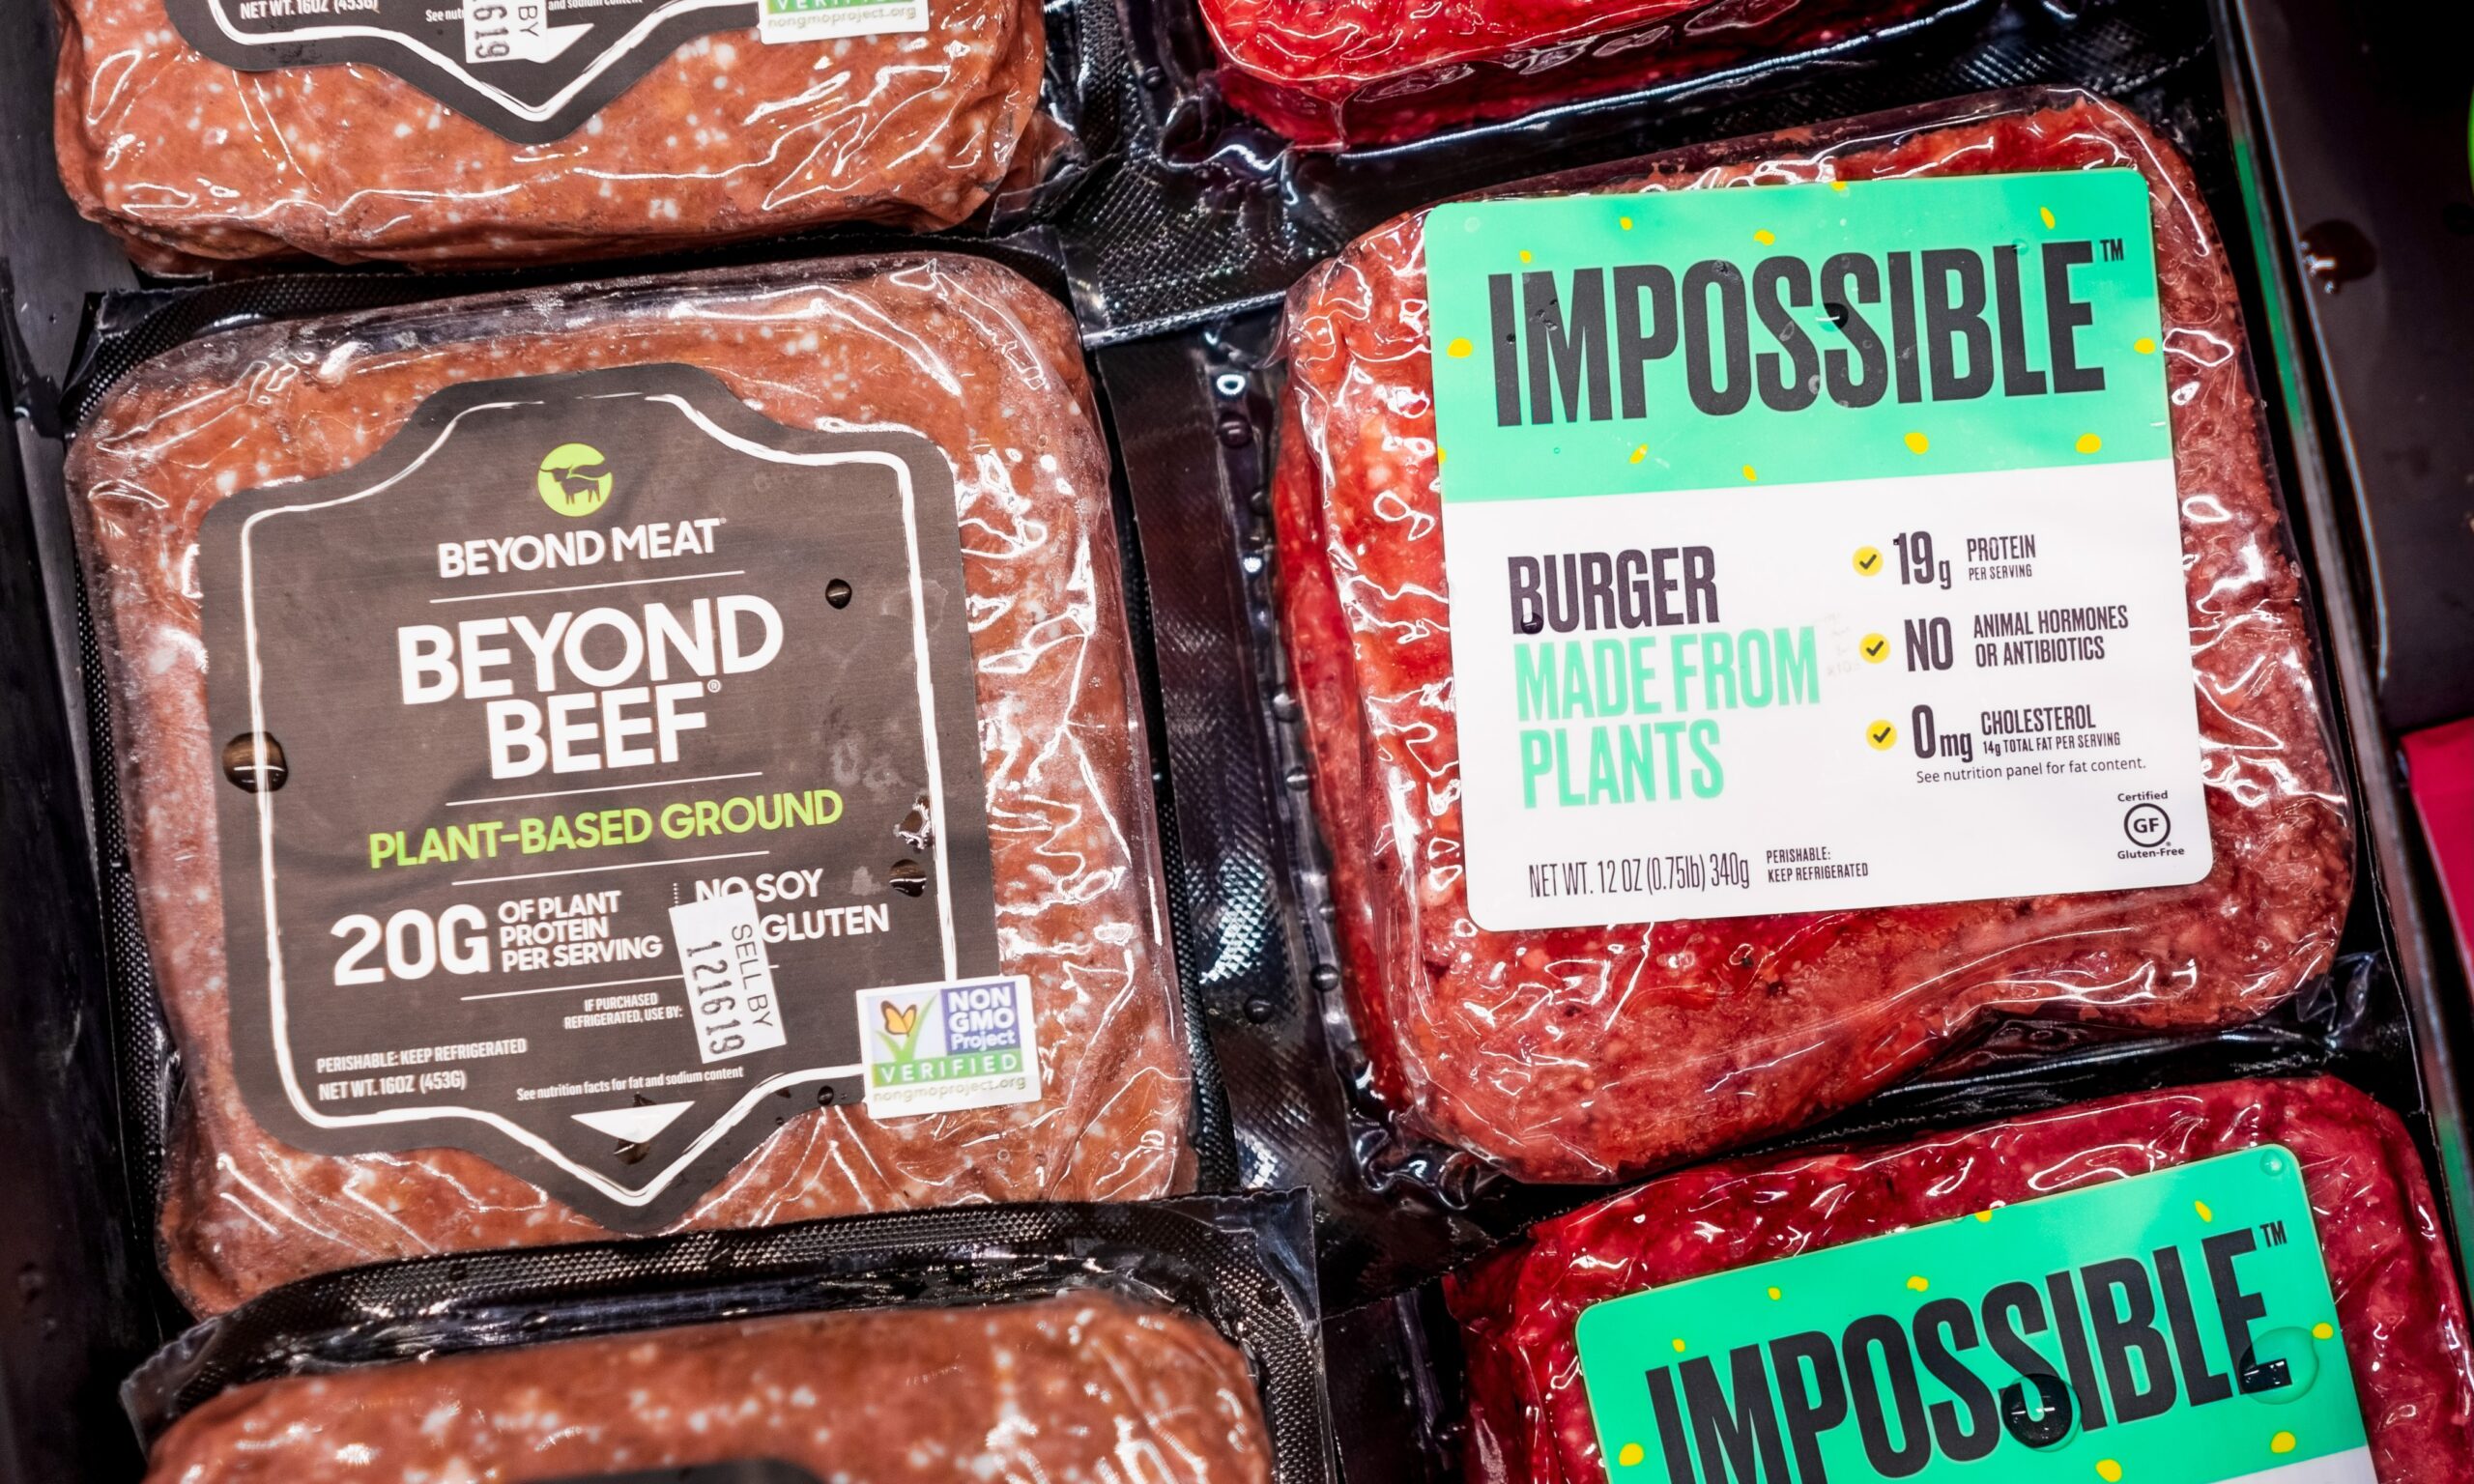 A close up picture of plant based "meat" products made by Beyond Meat and Impossible Foods.